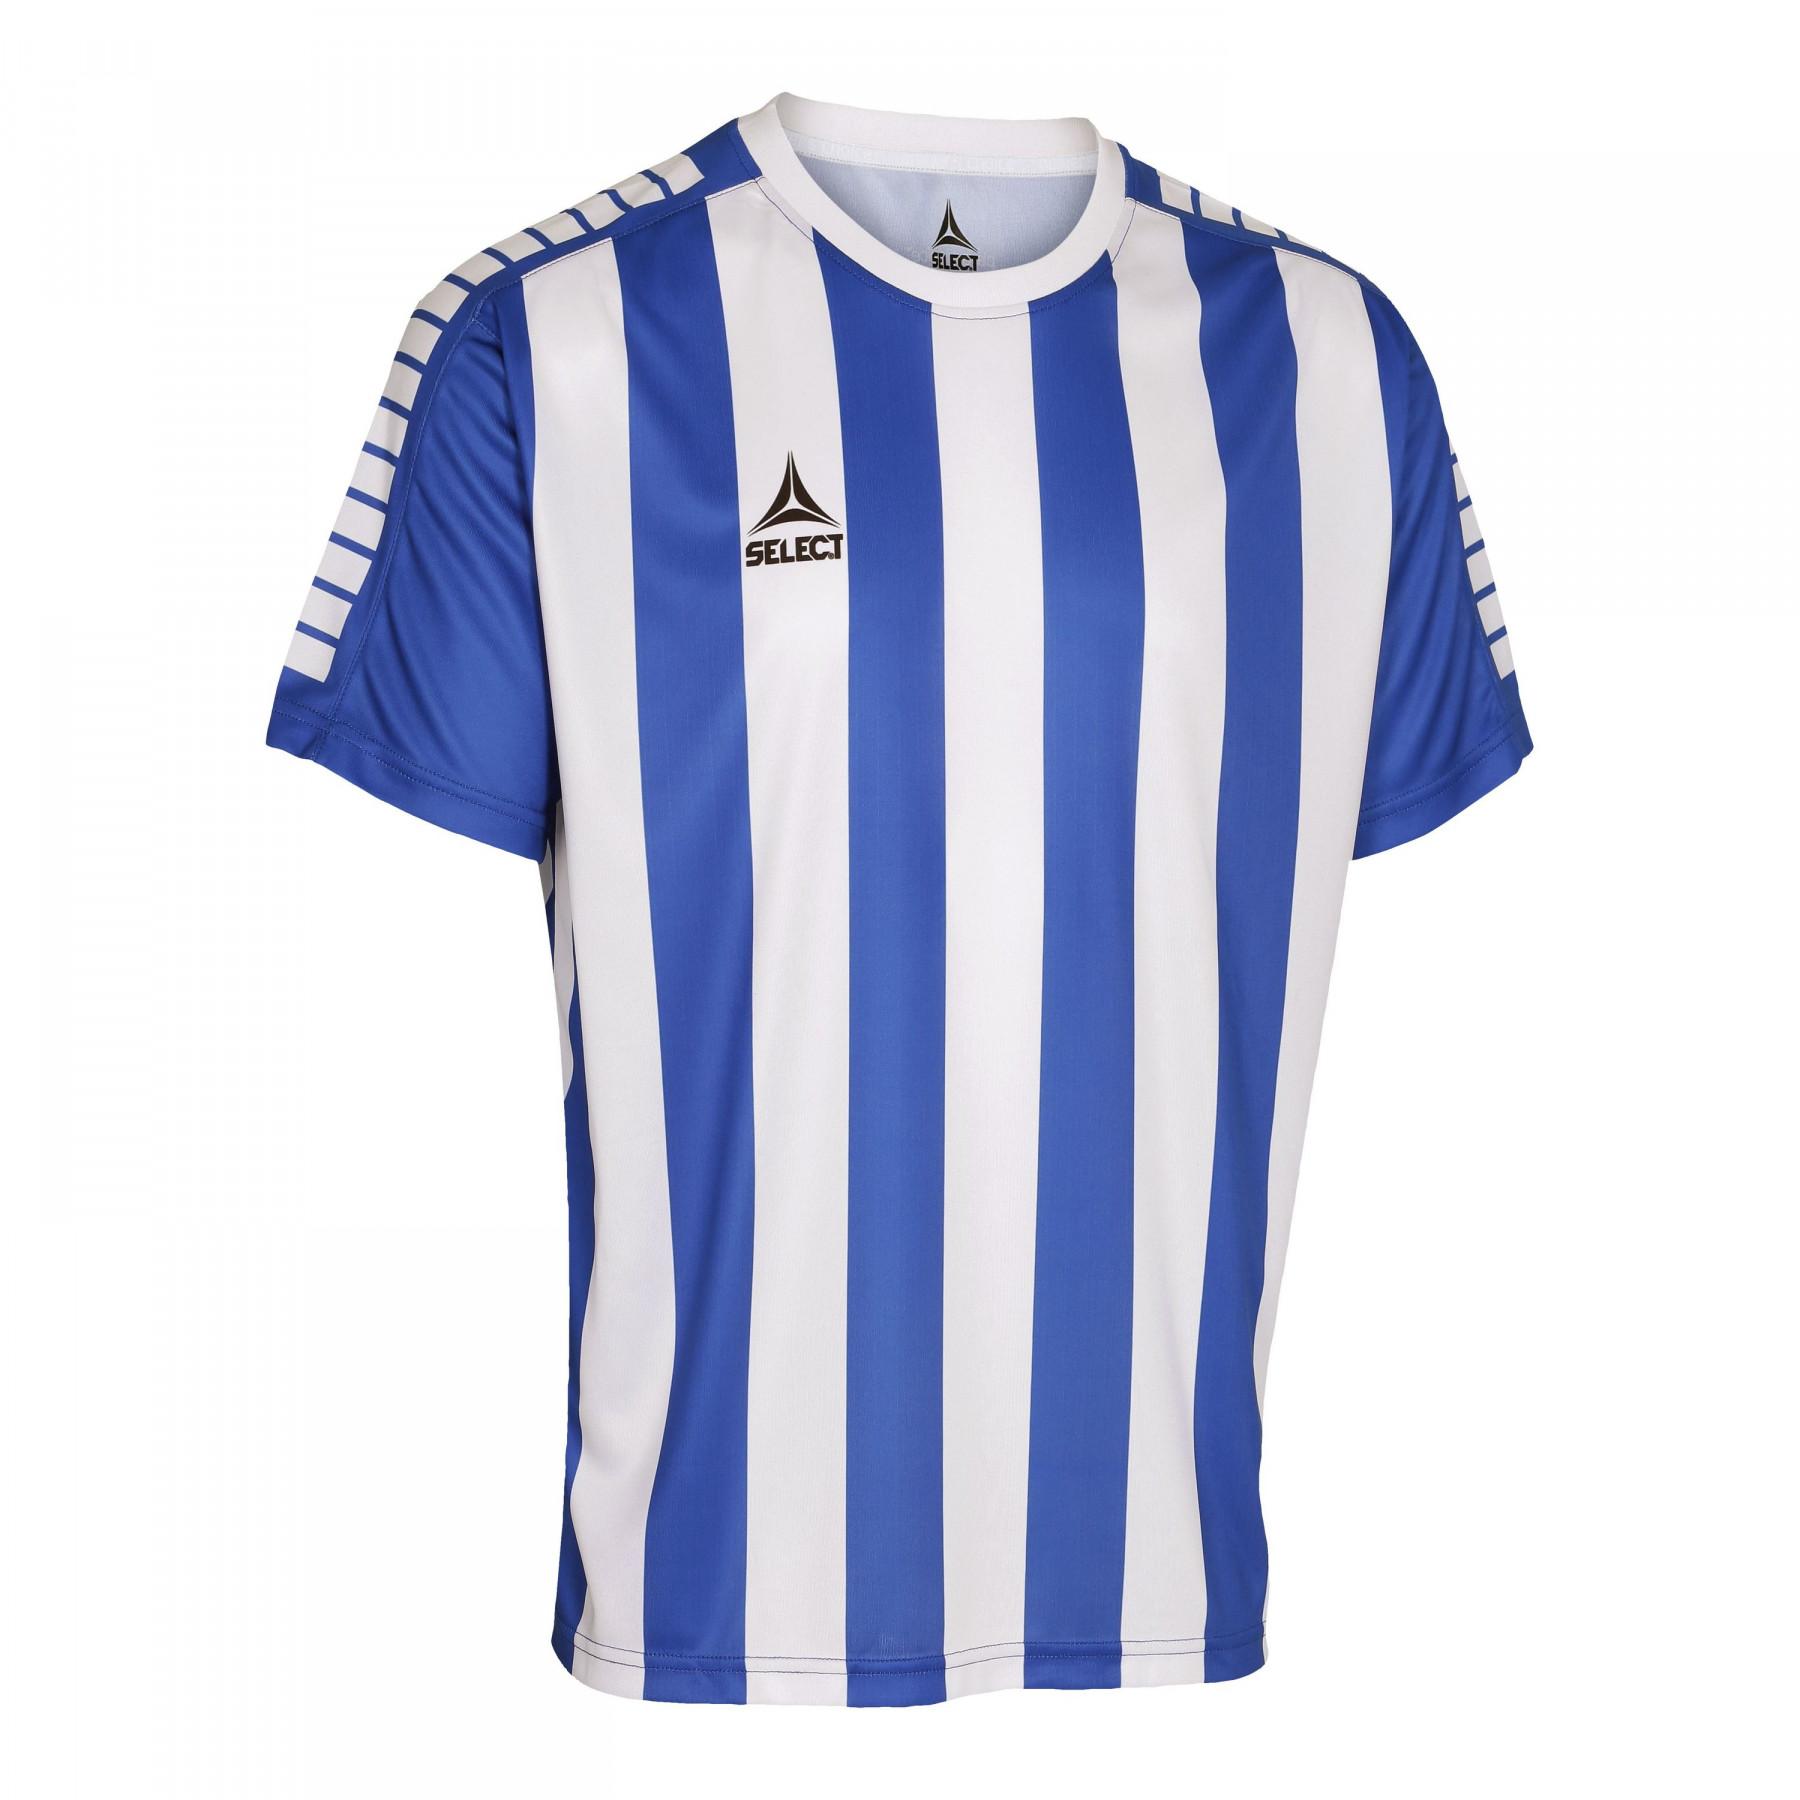 Maillot Select Argentina Striped